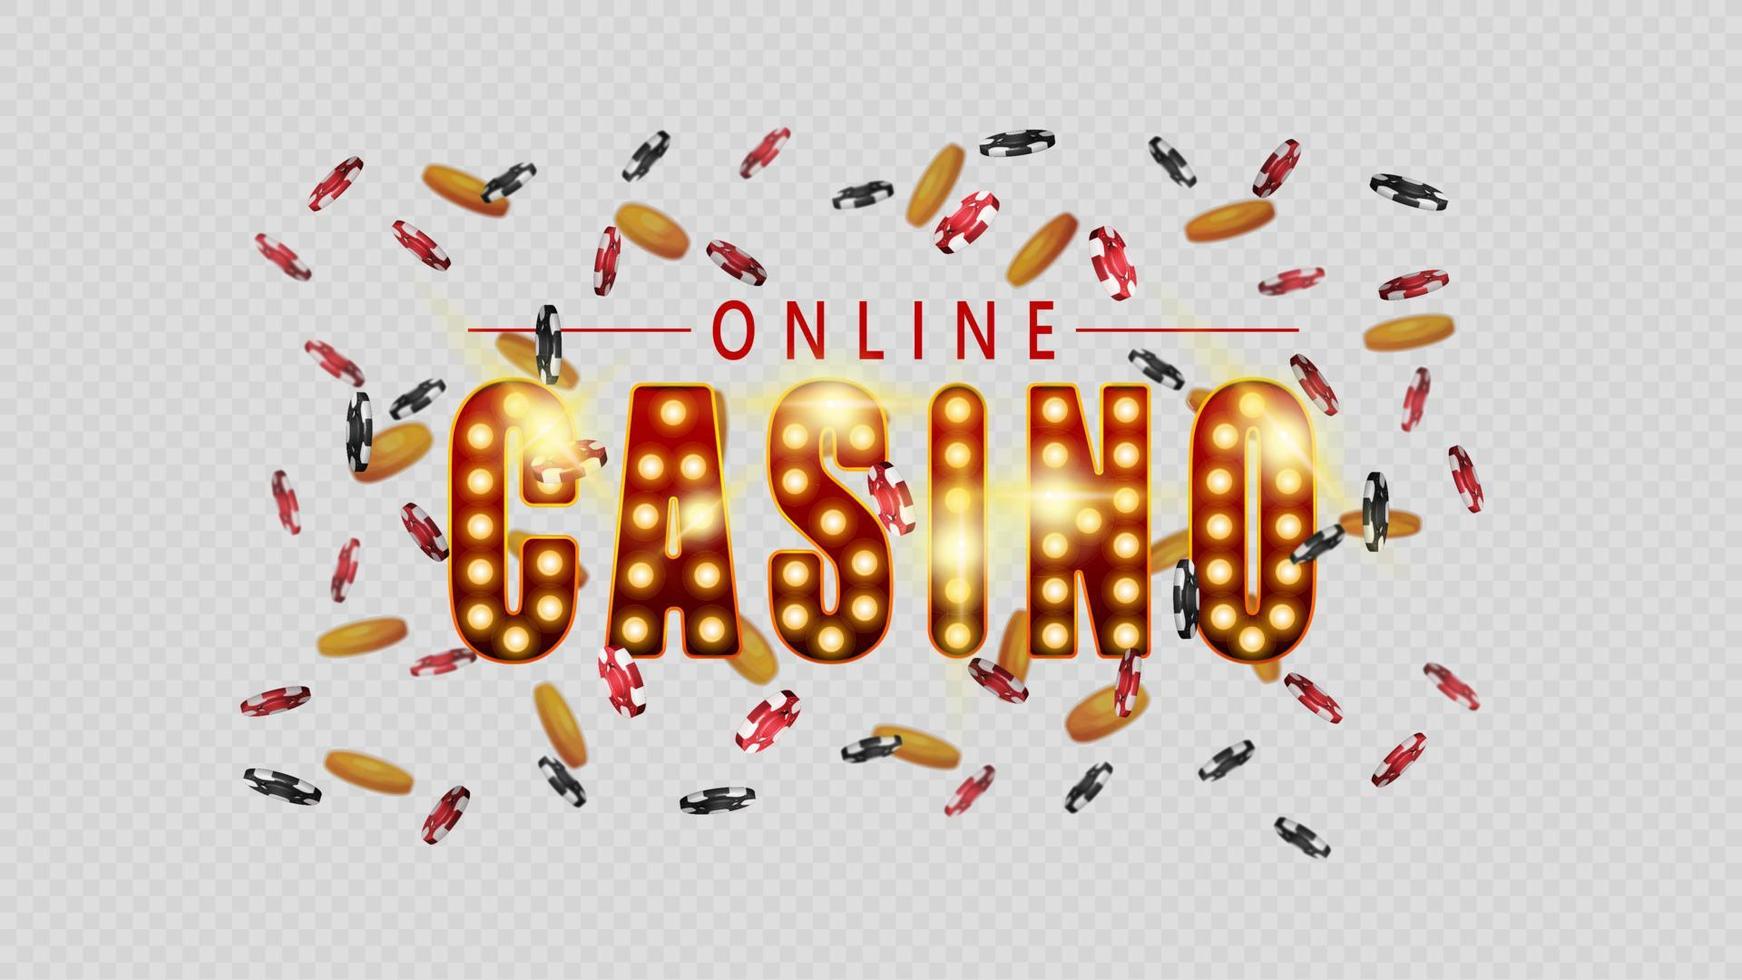 Online casino, symbol in vintage casino style with gold lamp bulbs isolated on white background. Sign with casino chips and gold coins flying around vector